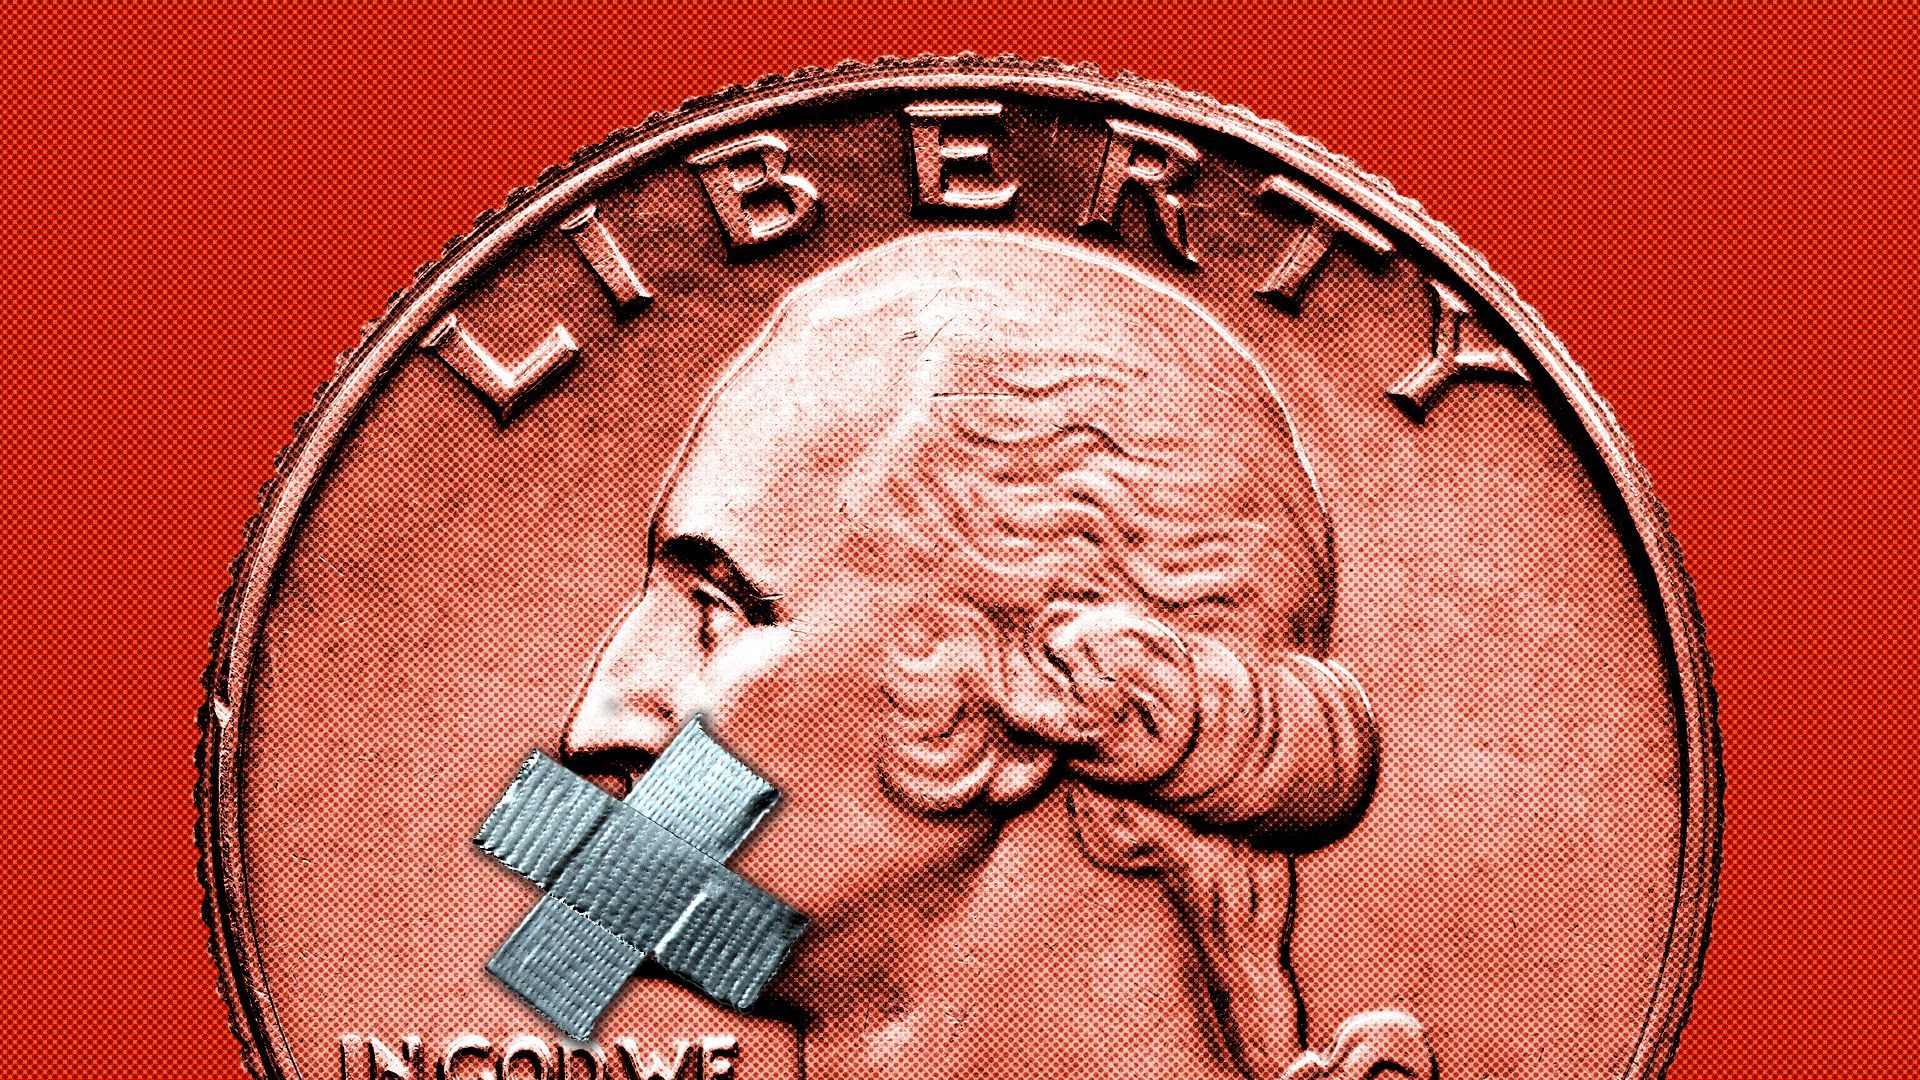 Illustration of a U.S. quarter coin with duct tape covering George Washington's mouth